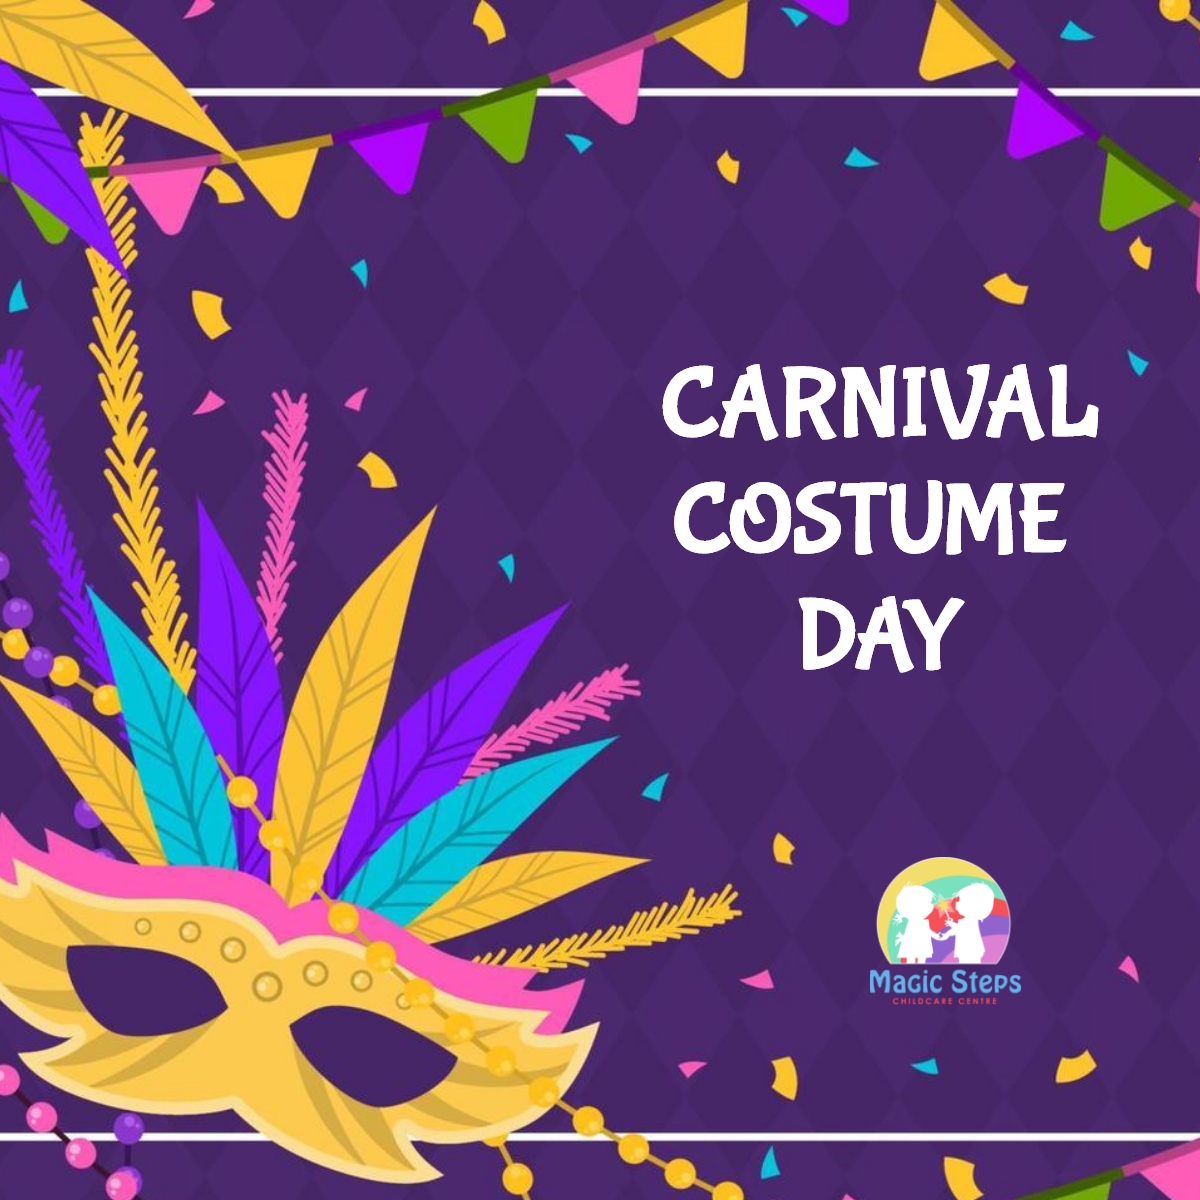 Carnival Costume Day- Friday 17th February